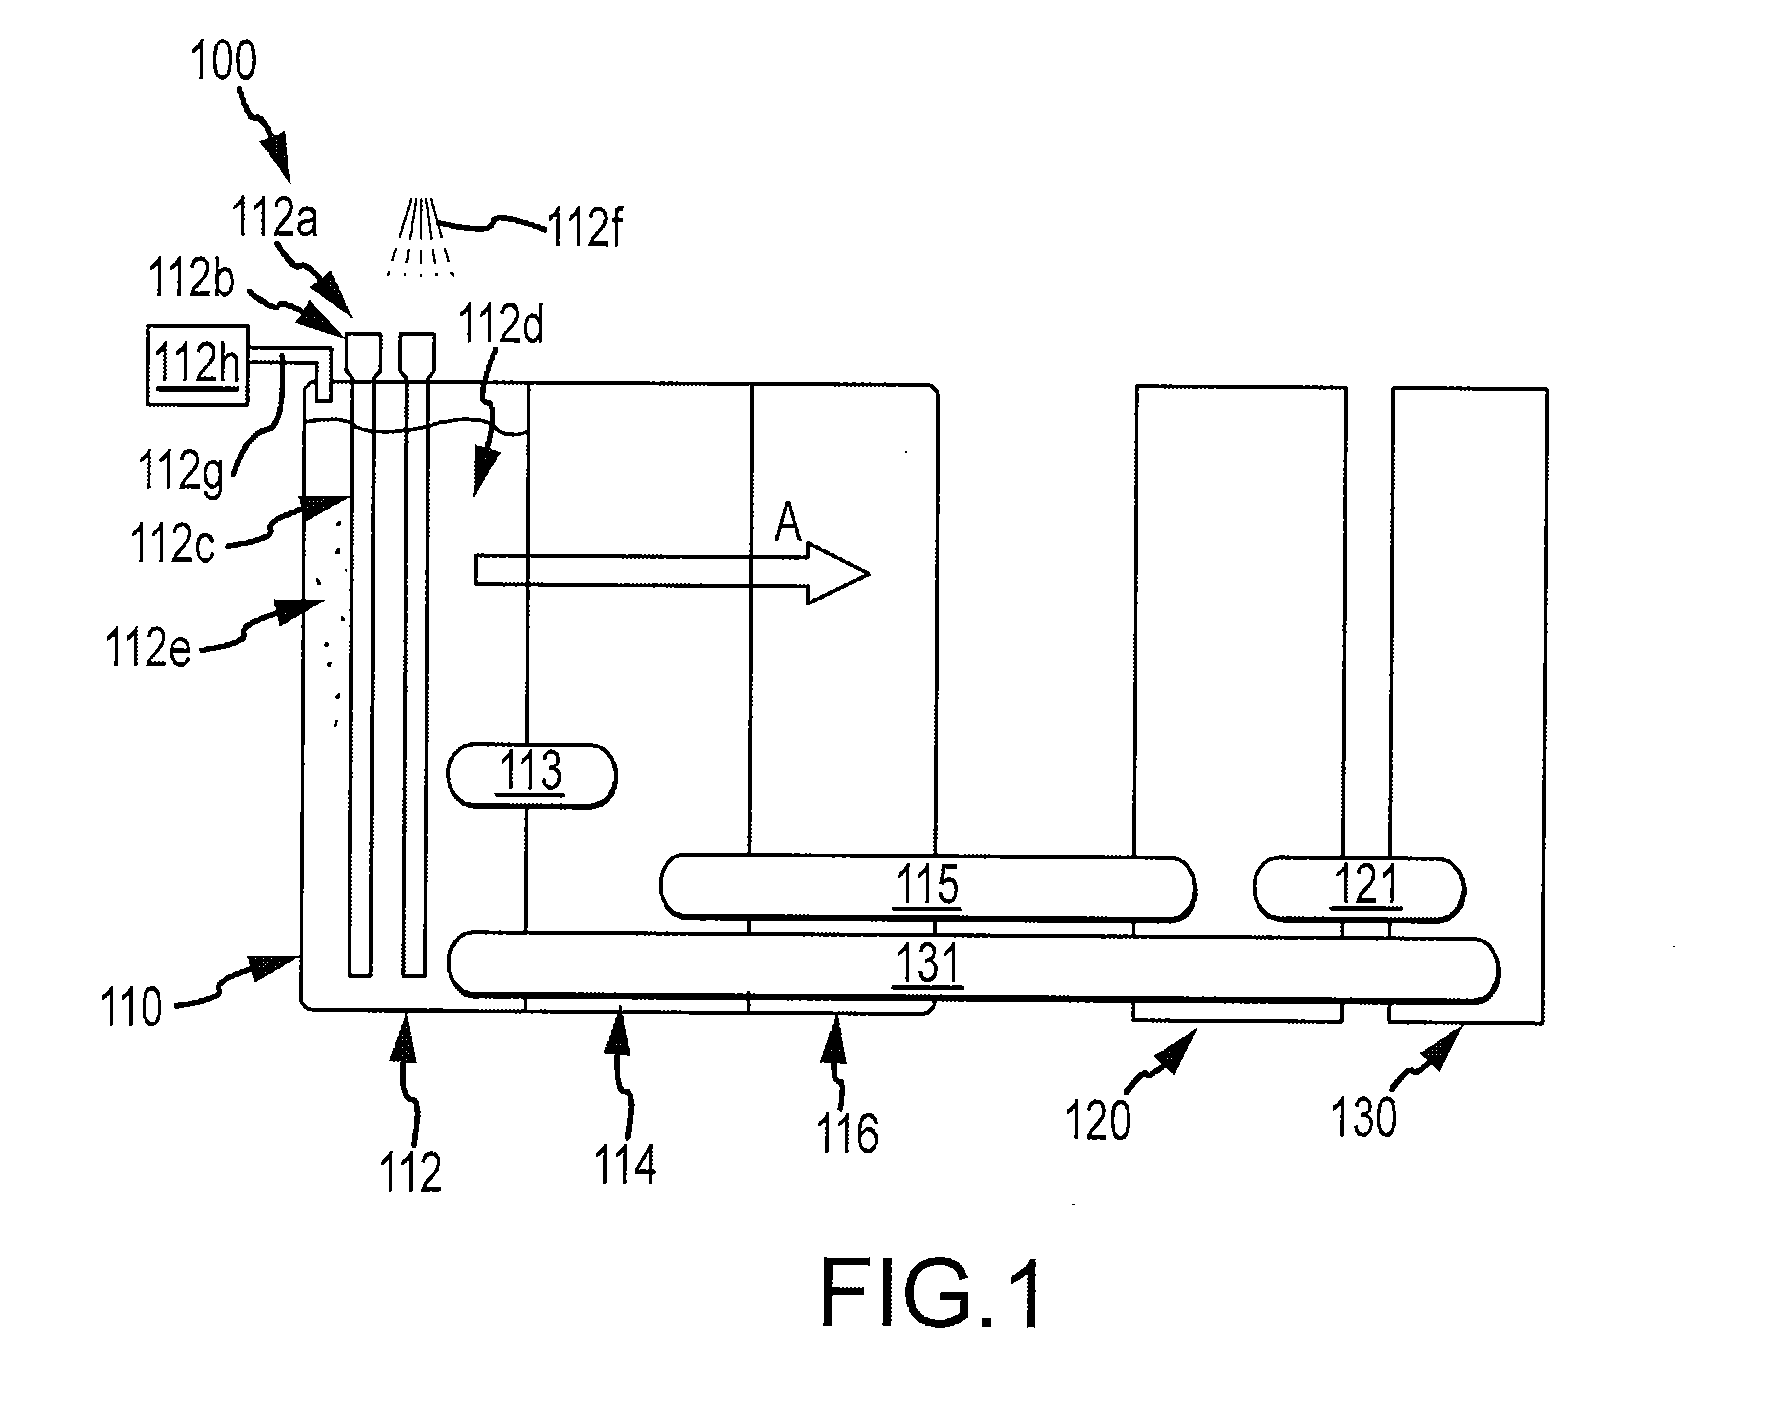 Apparatus and methods for production of biodiesel